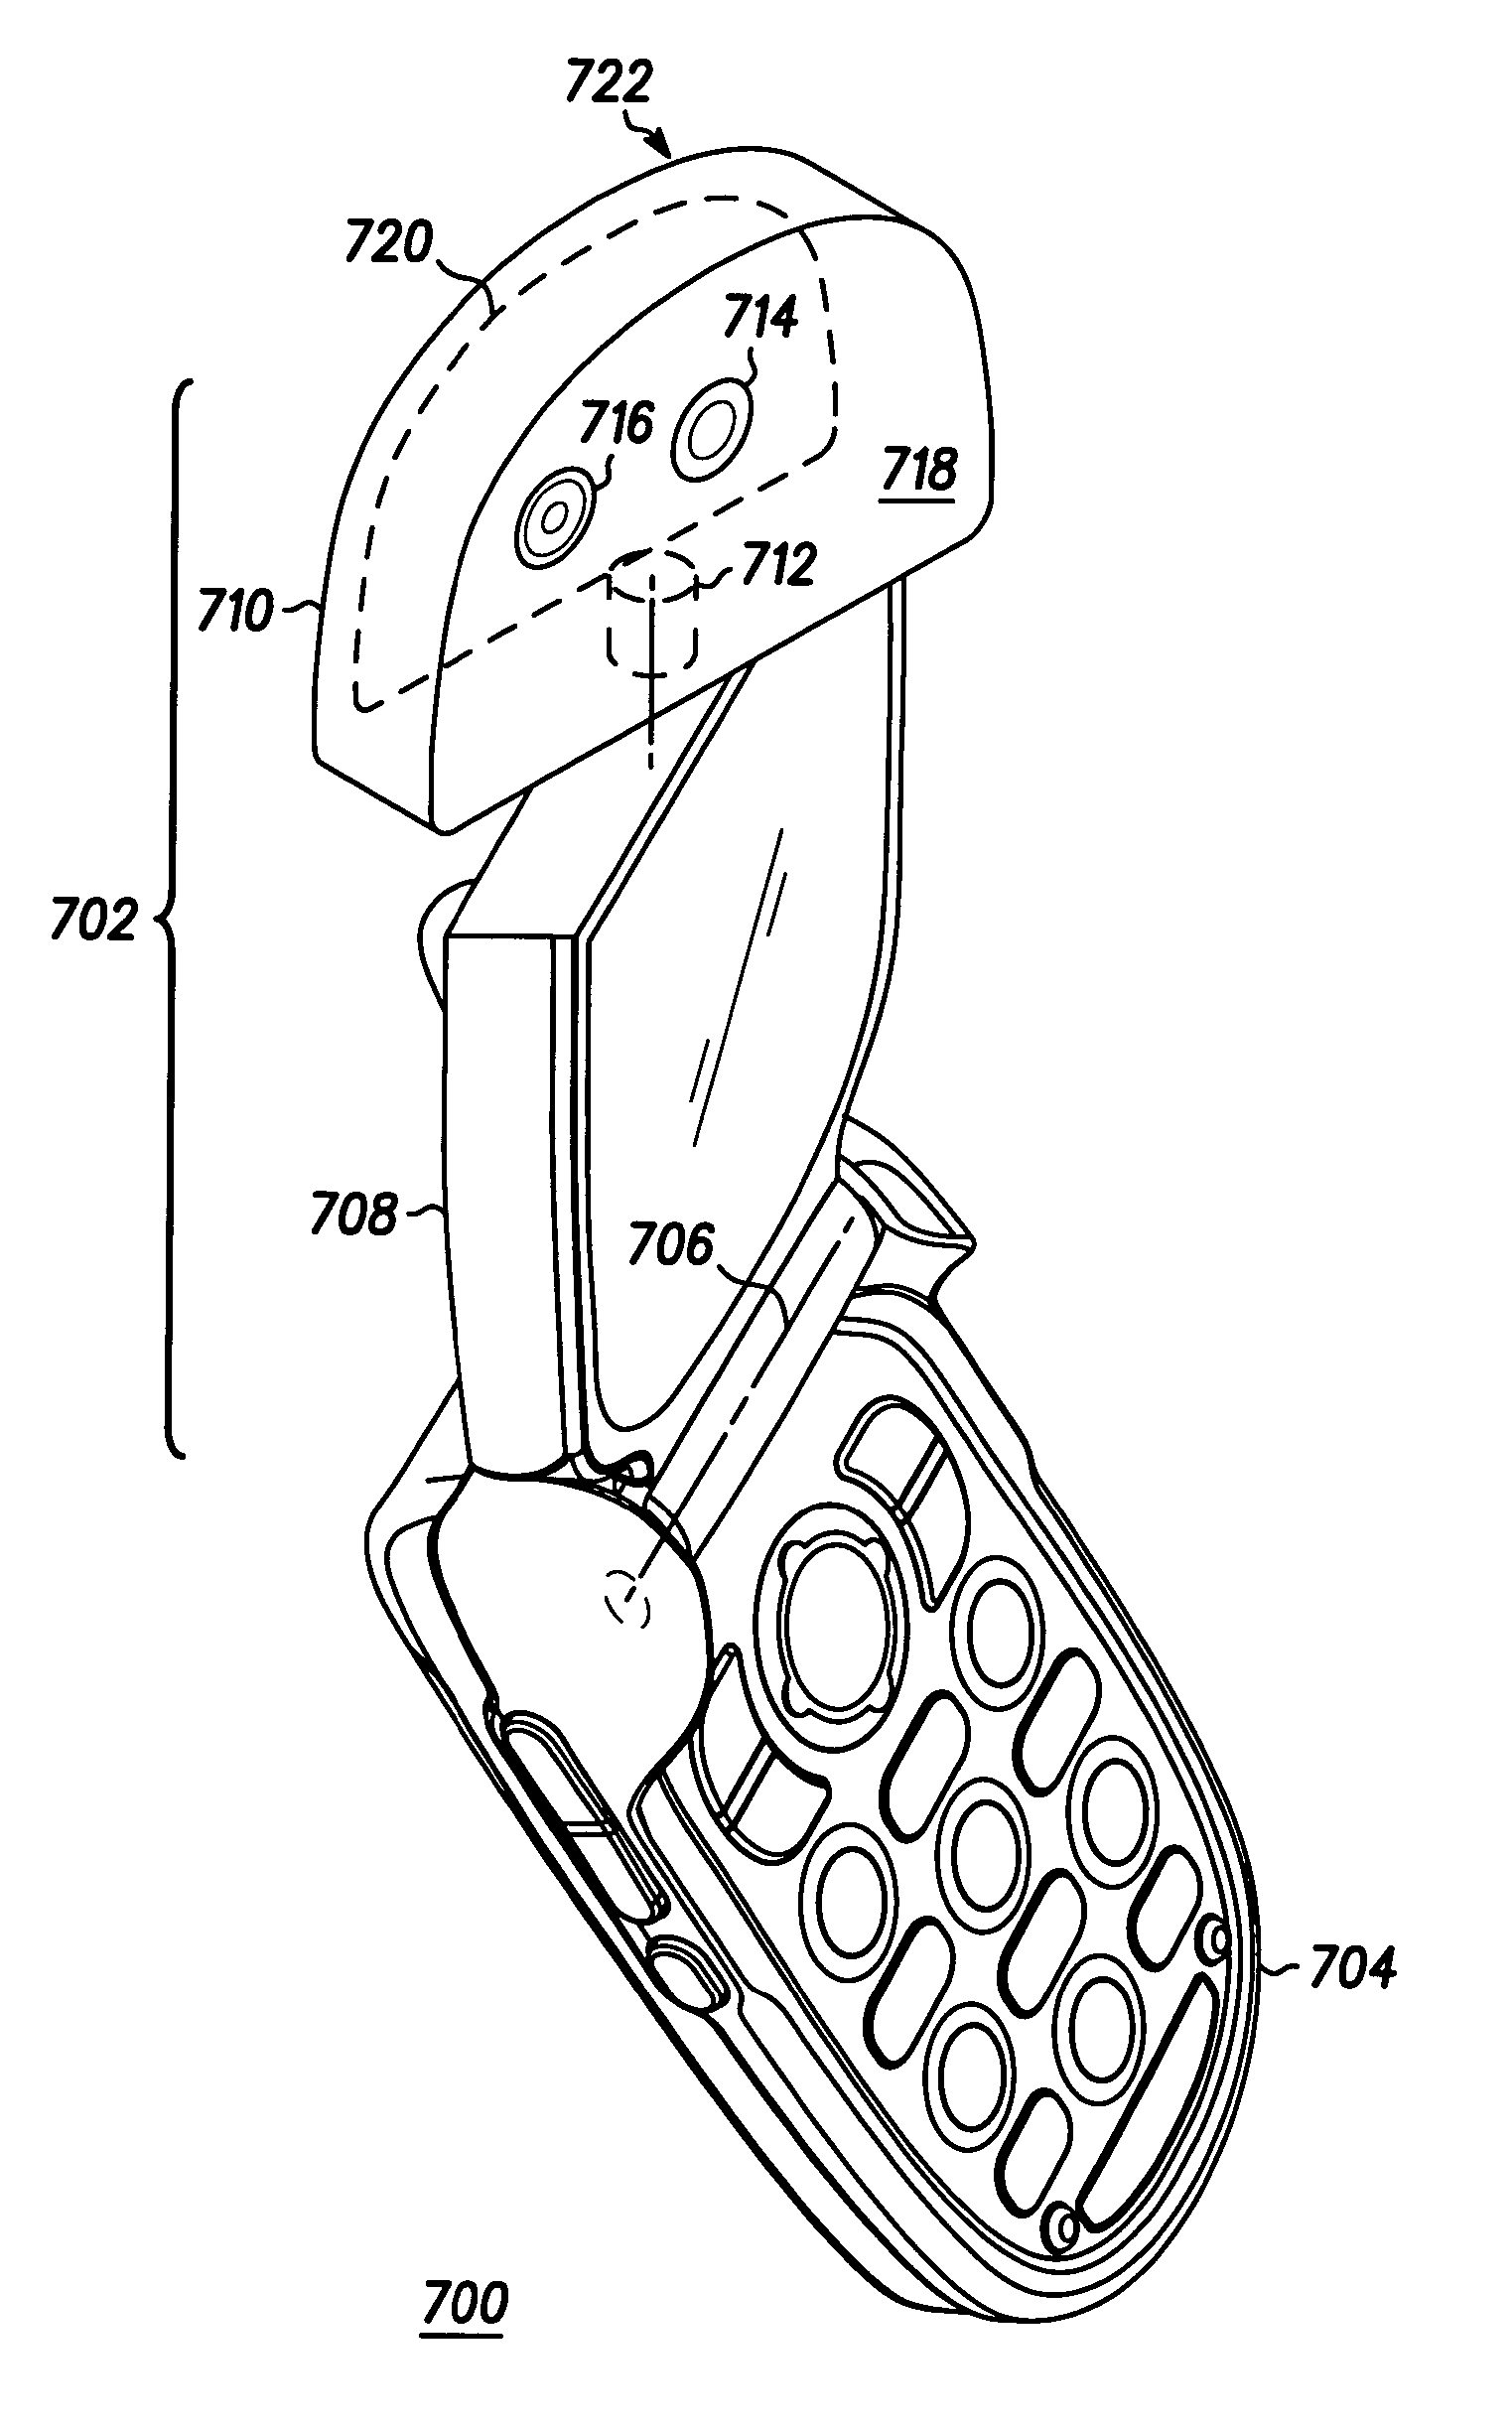 Cellular telephone with improved mechanical design